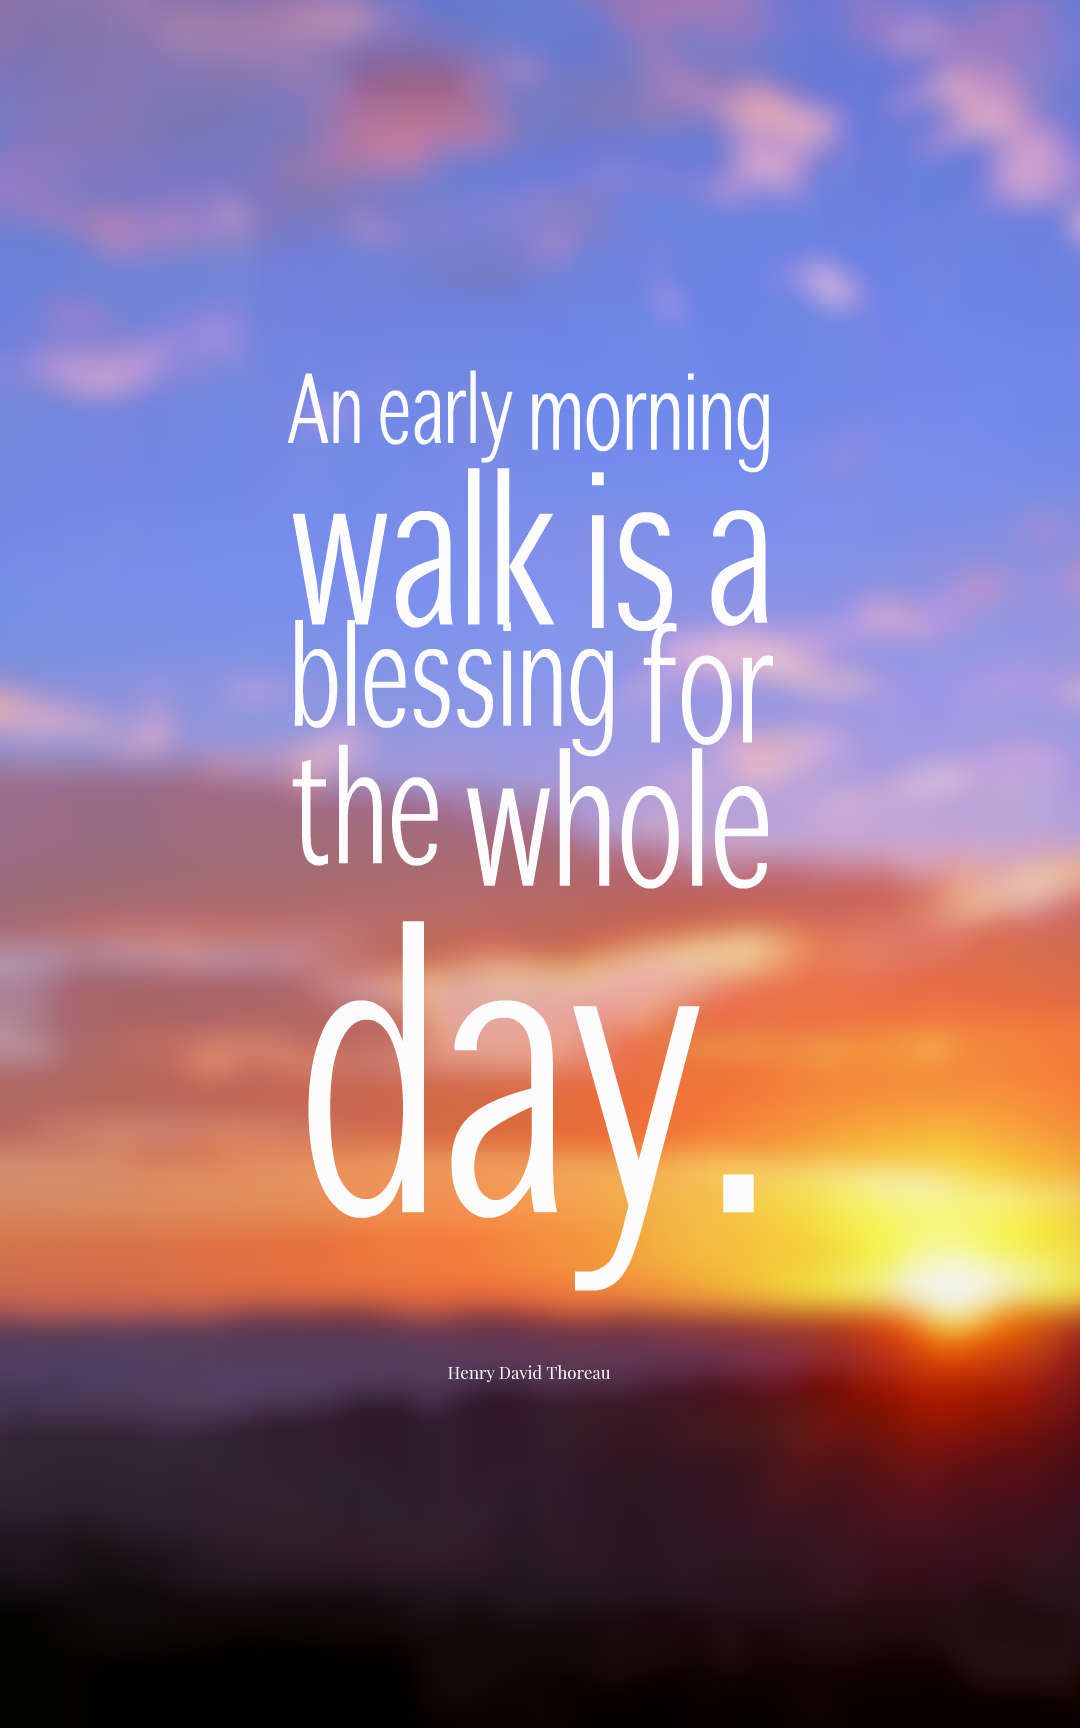 An early morning walk is a blessing for the whole day.